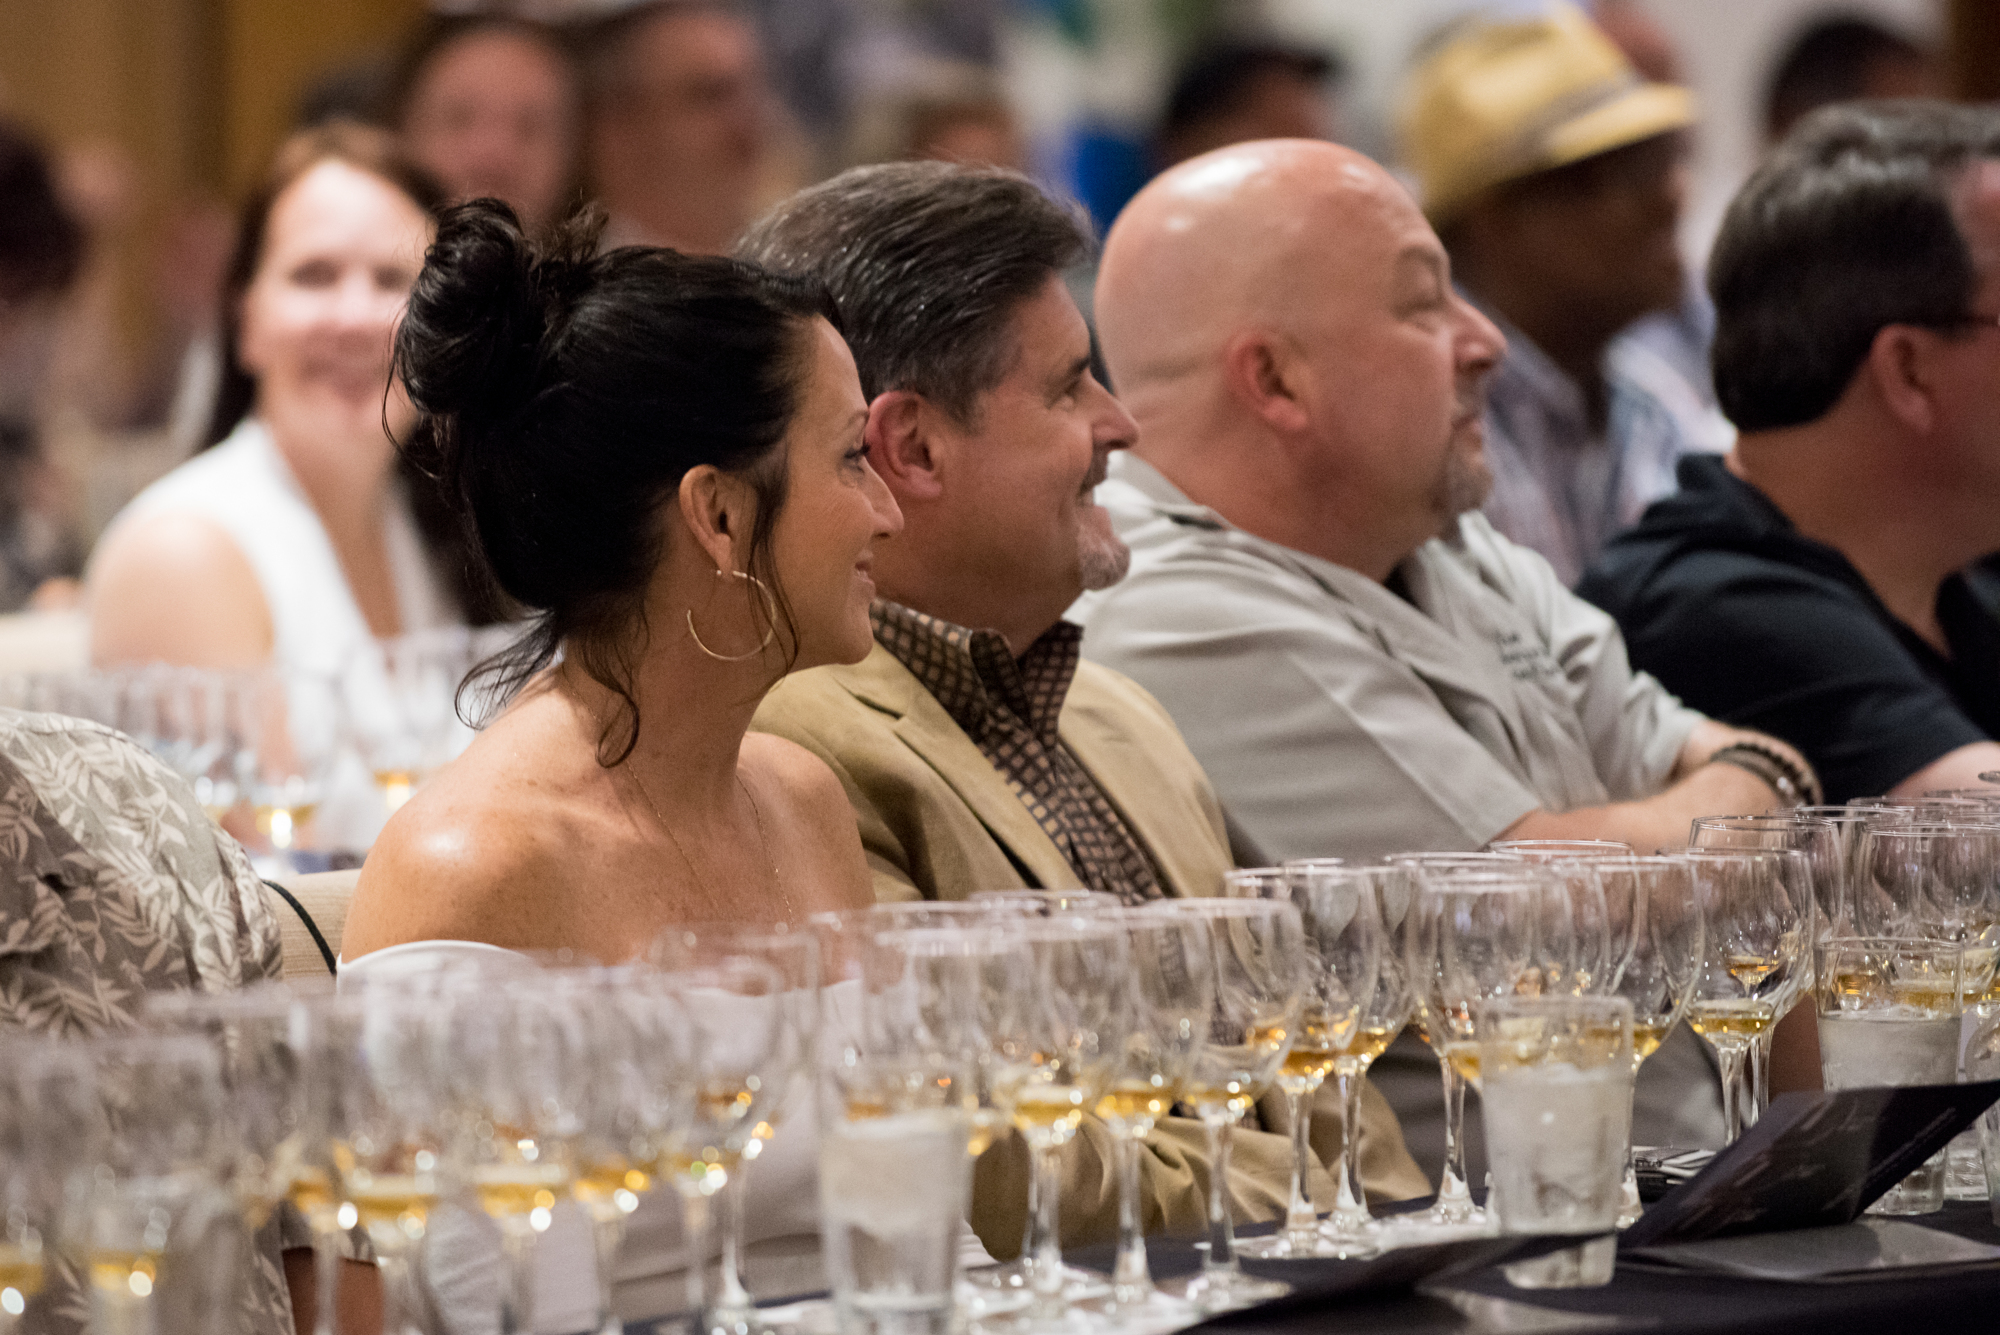 Whiskey Obsession Festival is the largest world whiskey festival in the U.S., with four days of classes, tastings, panel discussions, VIP pours and more. Courtesy photo